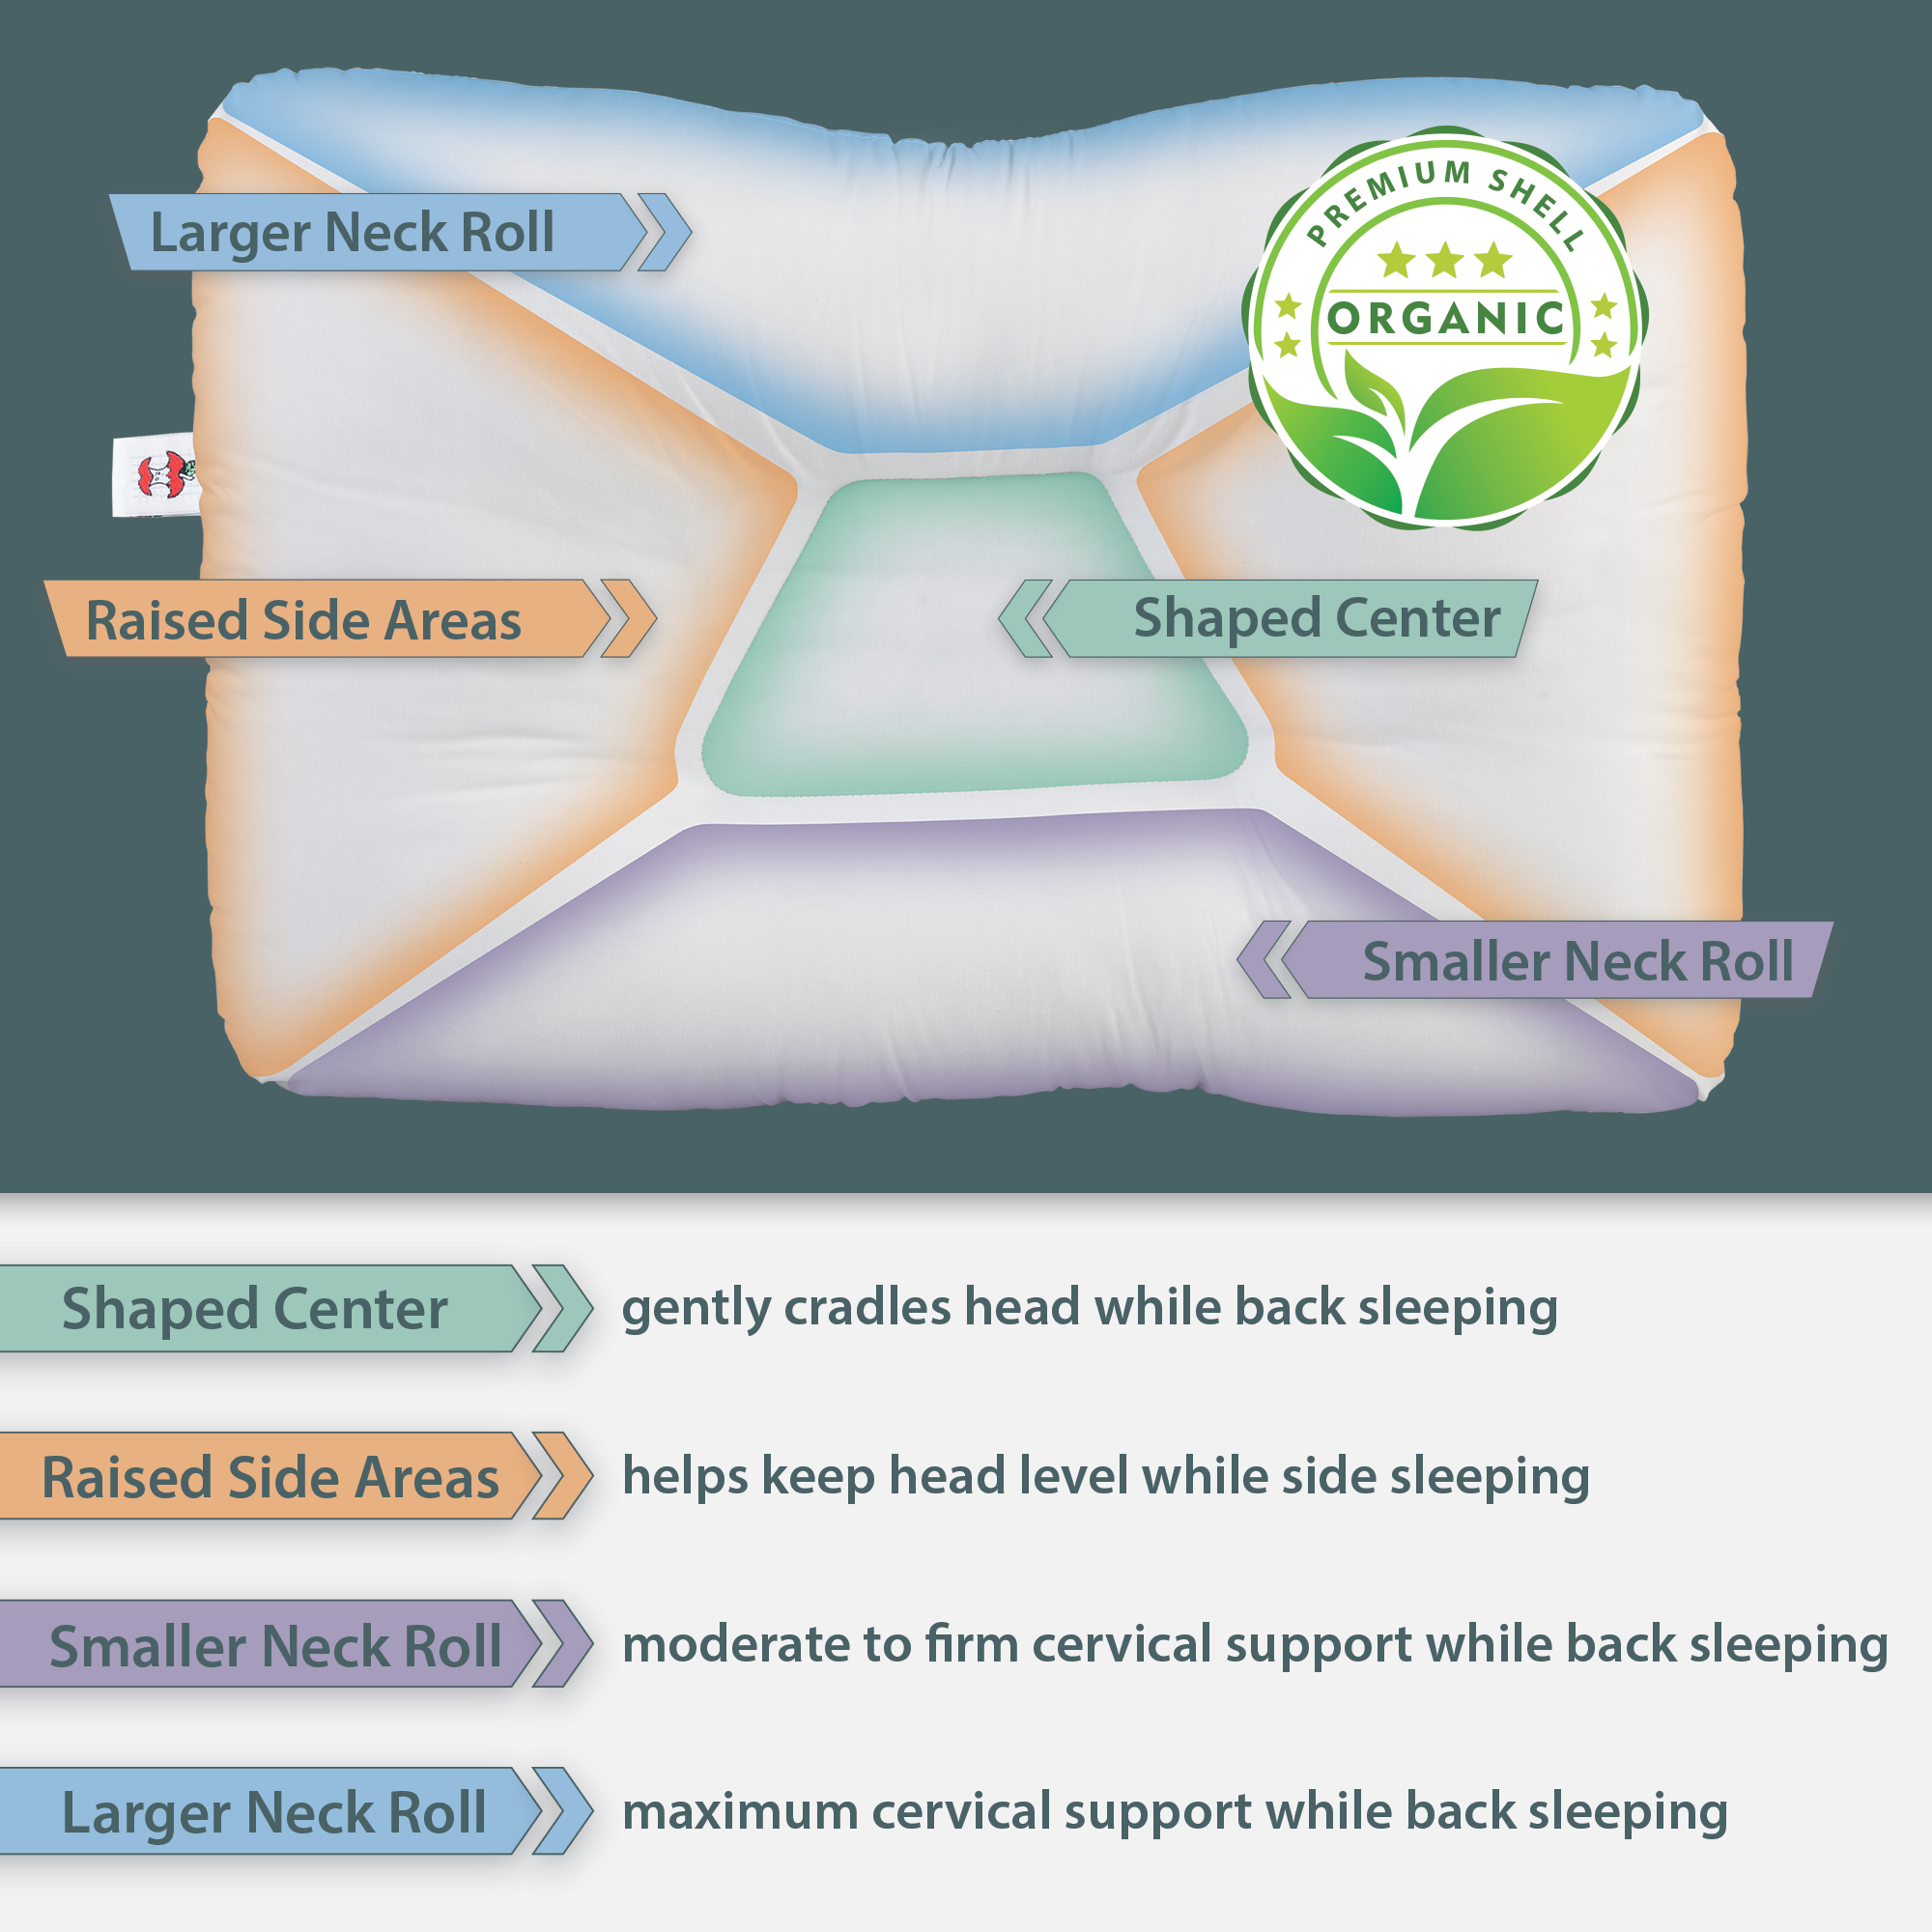 Tri-Core Natural Cervical Support Pillow with Premium Organic Cotton Shell